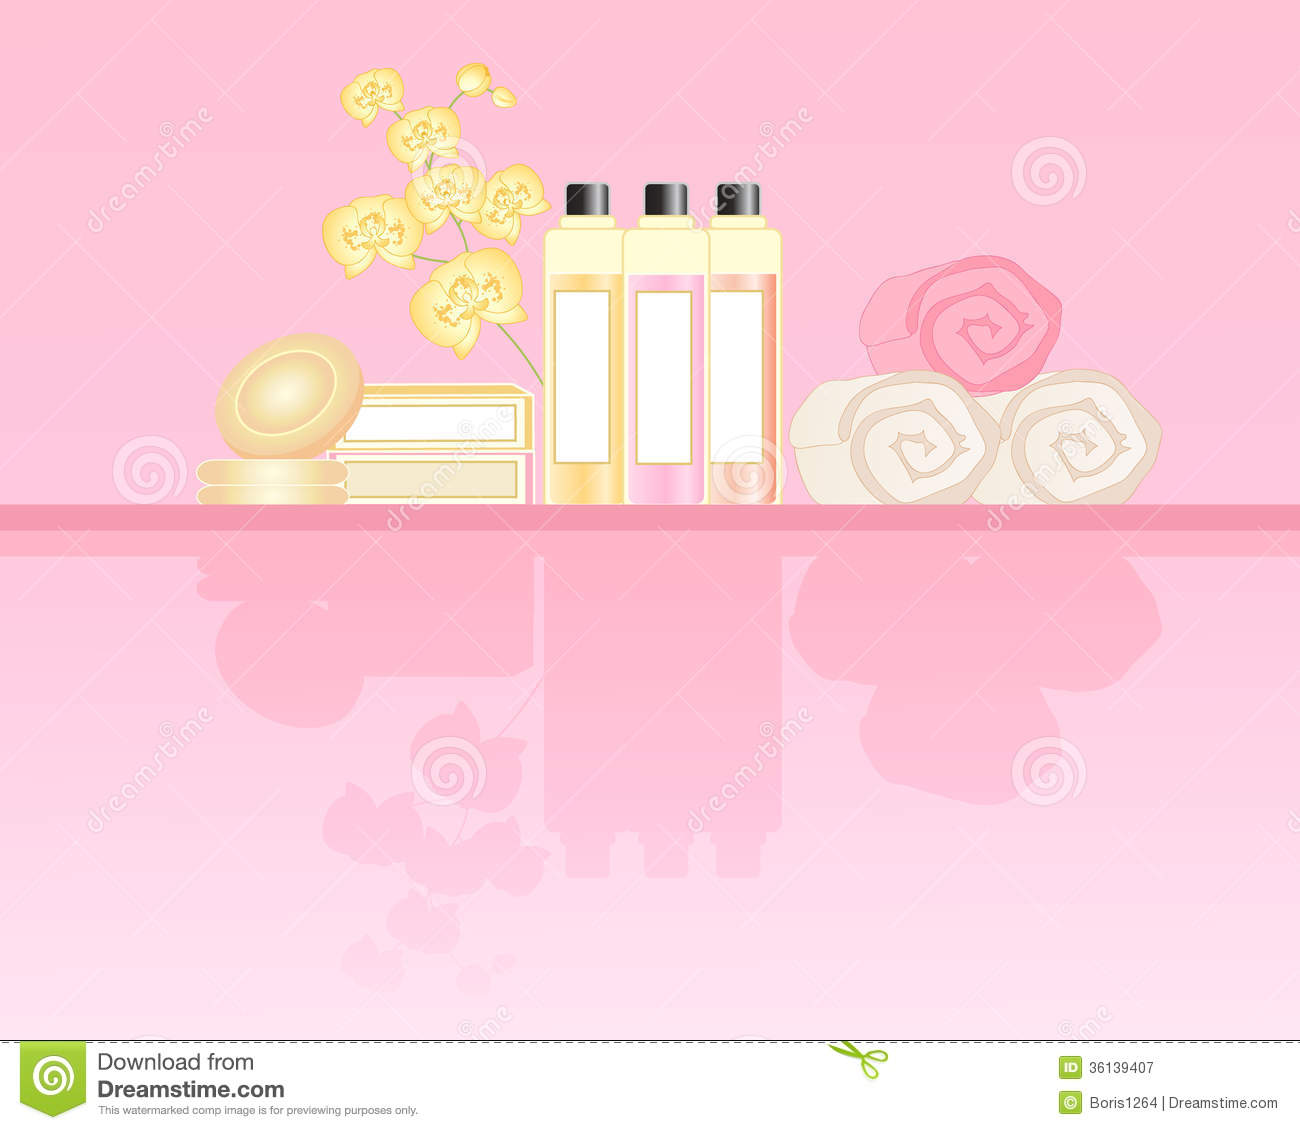 An Illustration Of A Collection Of Hotel Cosmetics With Face Cloths